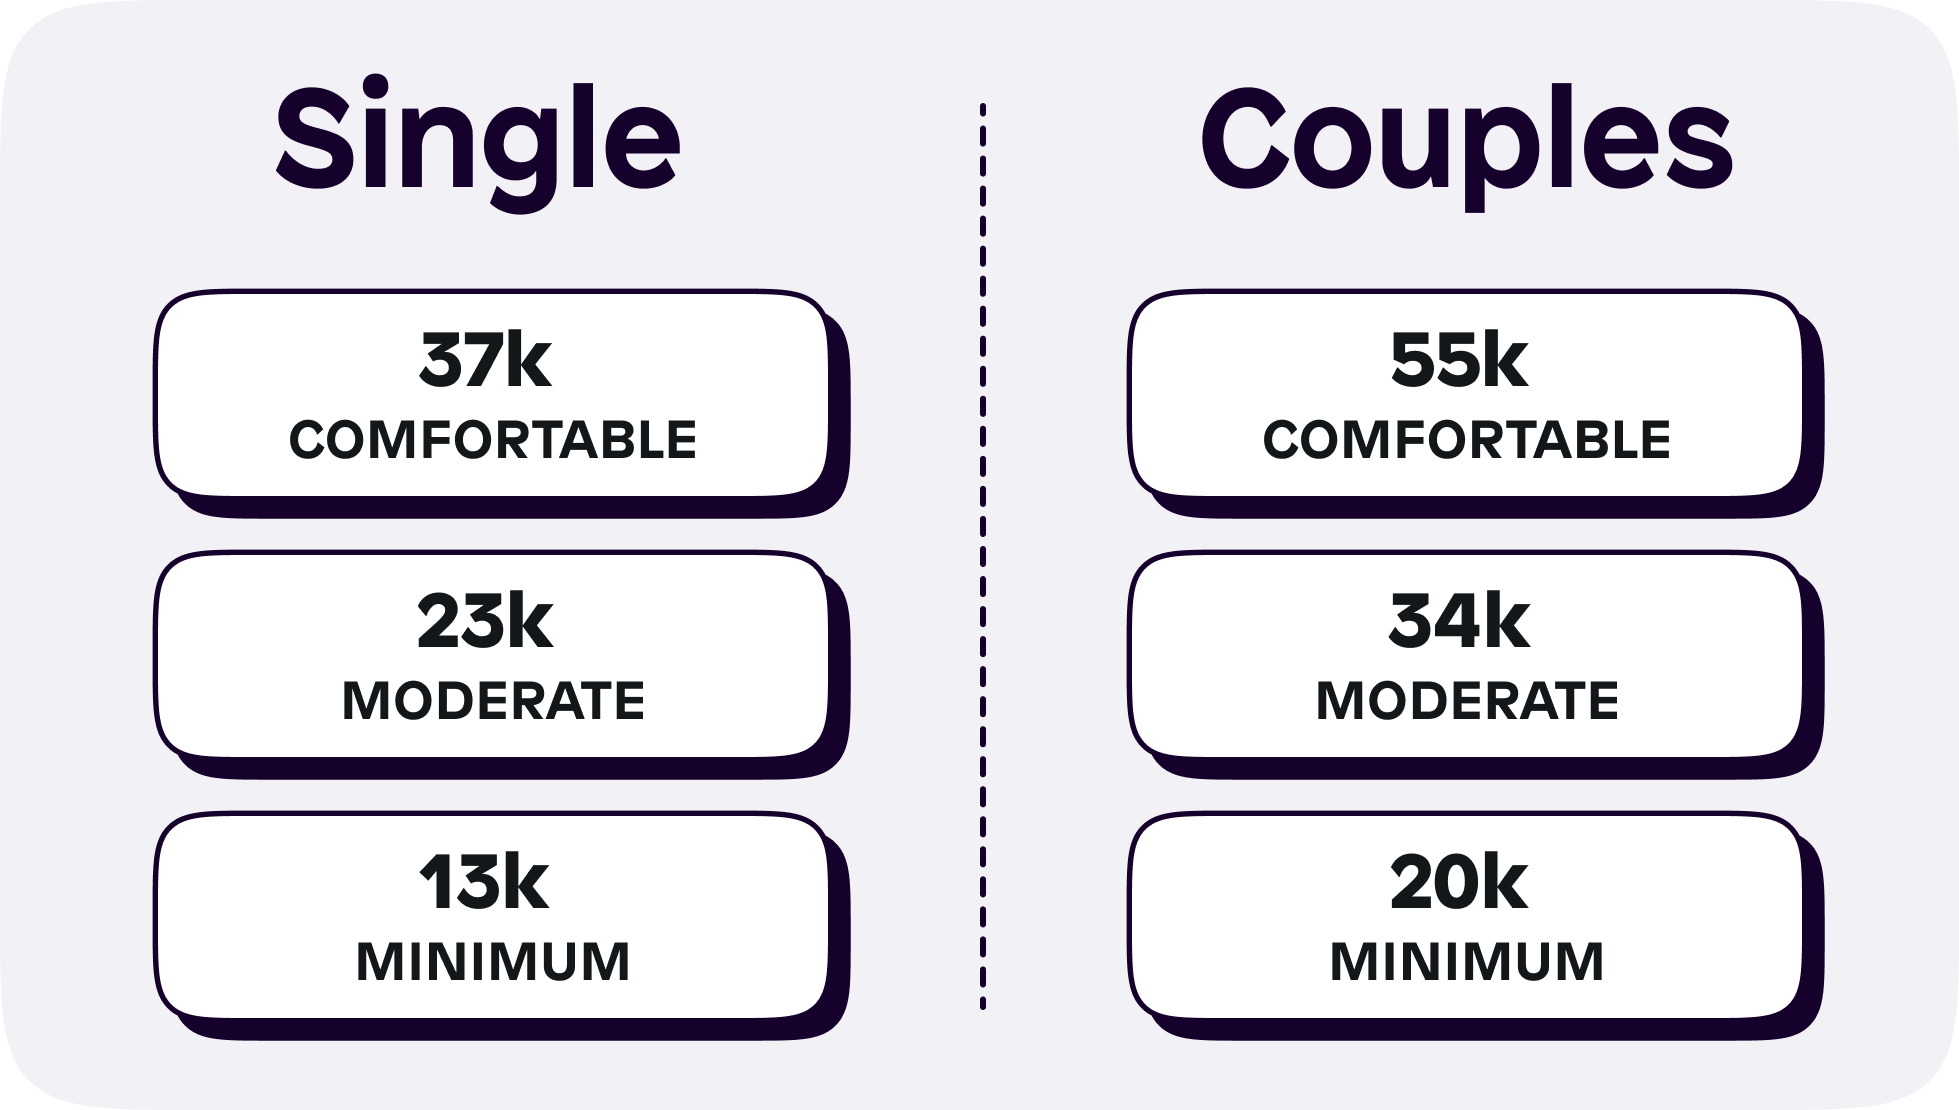 Comfortable, moderate or minimum money amounts needed for a single person and couple in retirement